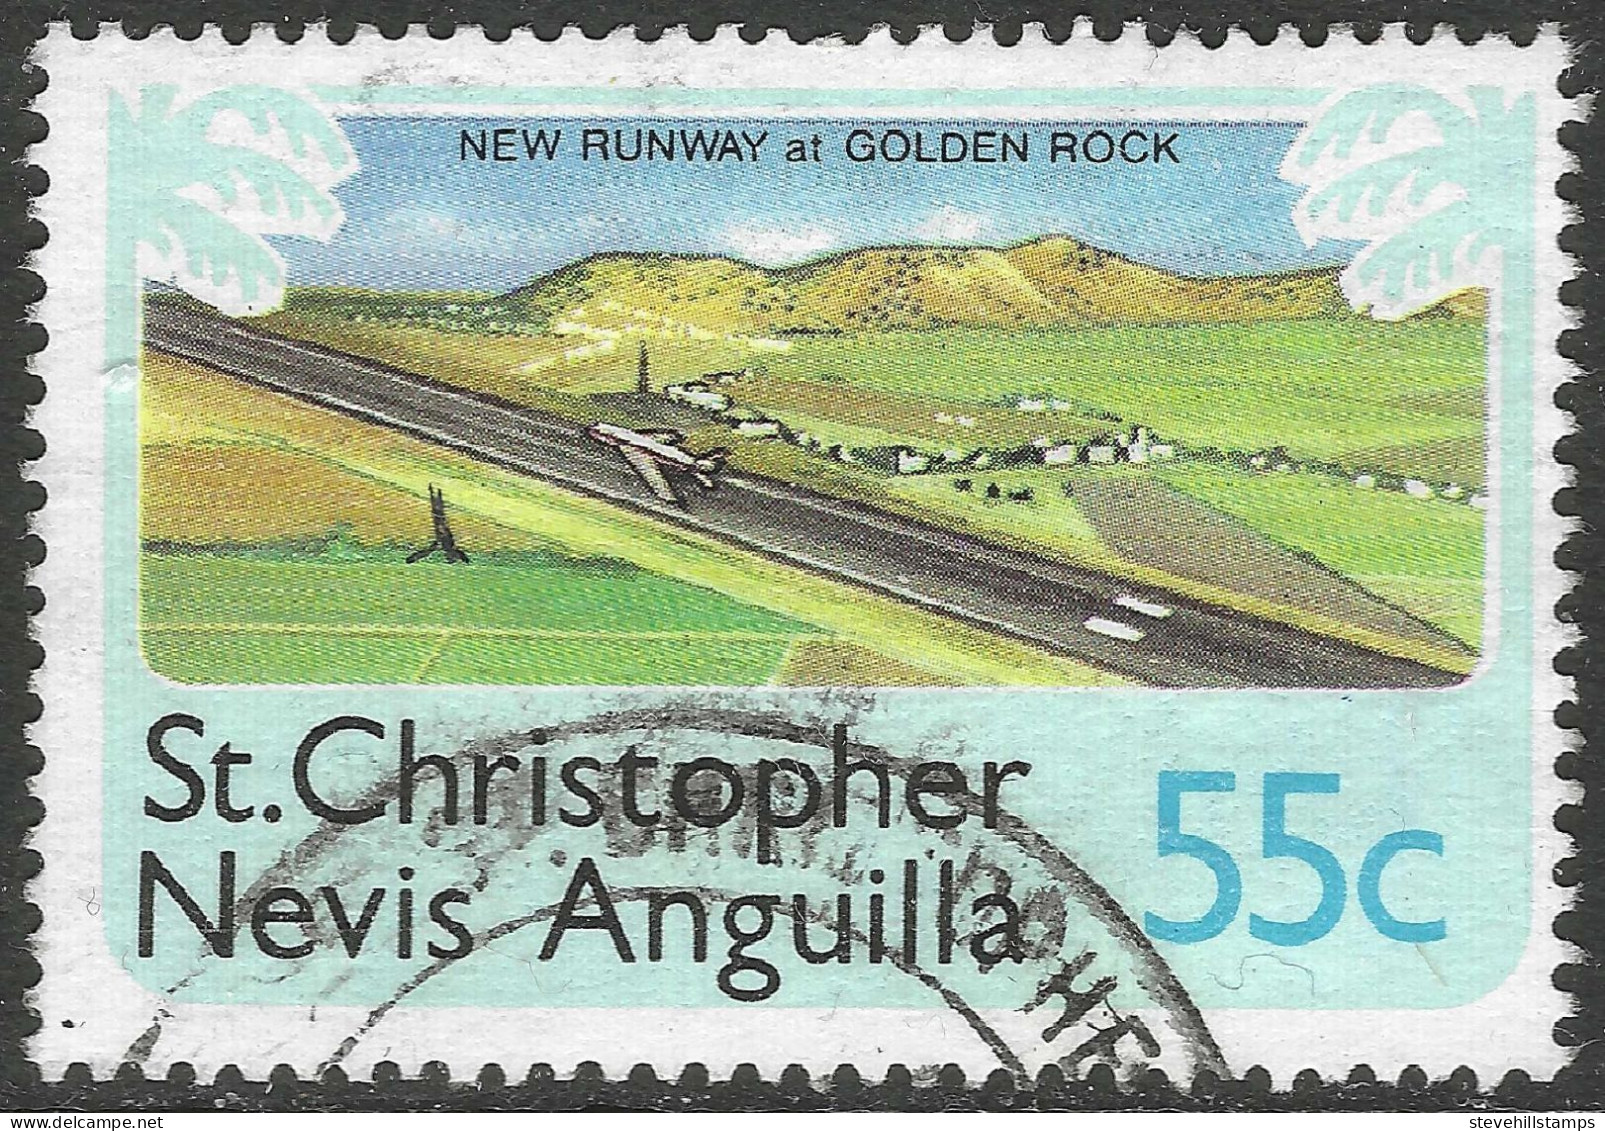 St Kitts-Nevis. 1978 Definitives. 55c Used. SG 403. M3147 - St.Christopher-Nevis-Anguilla (...-1980)